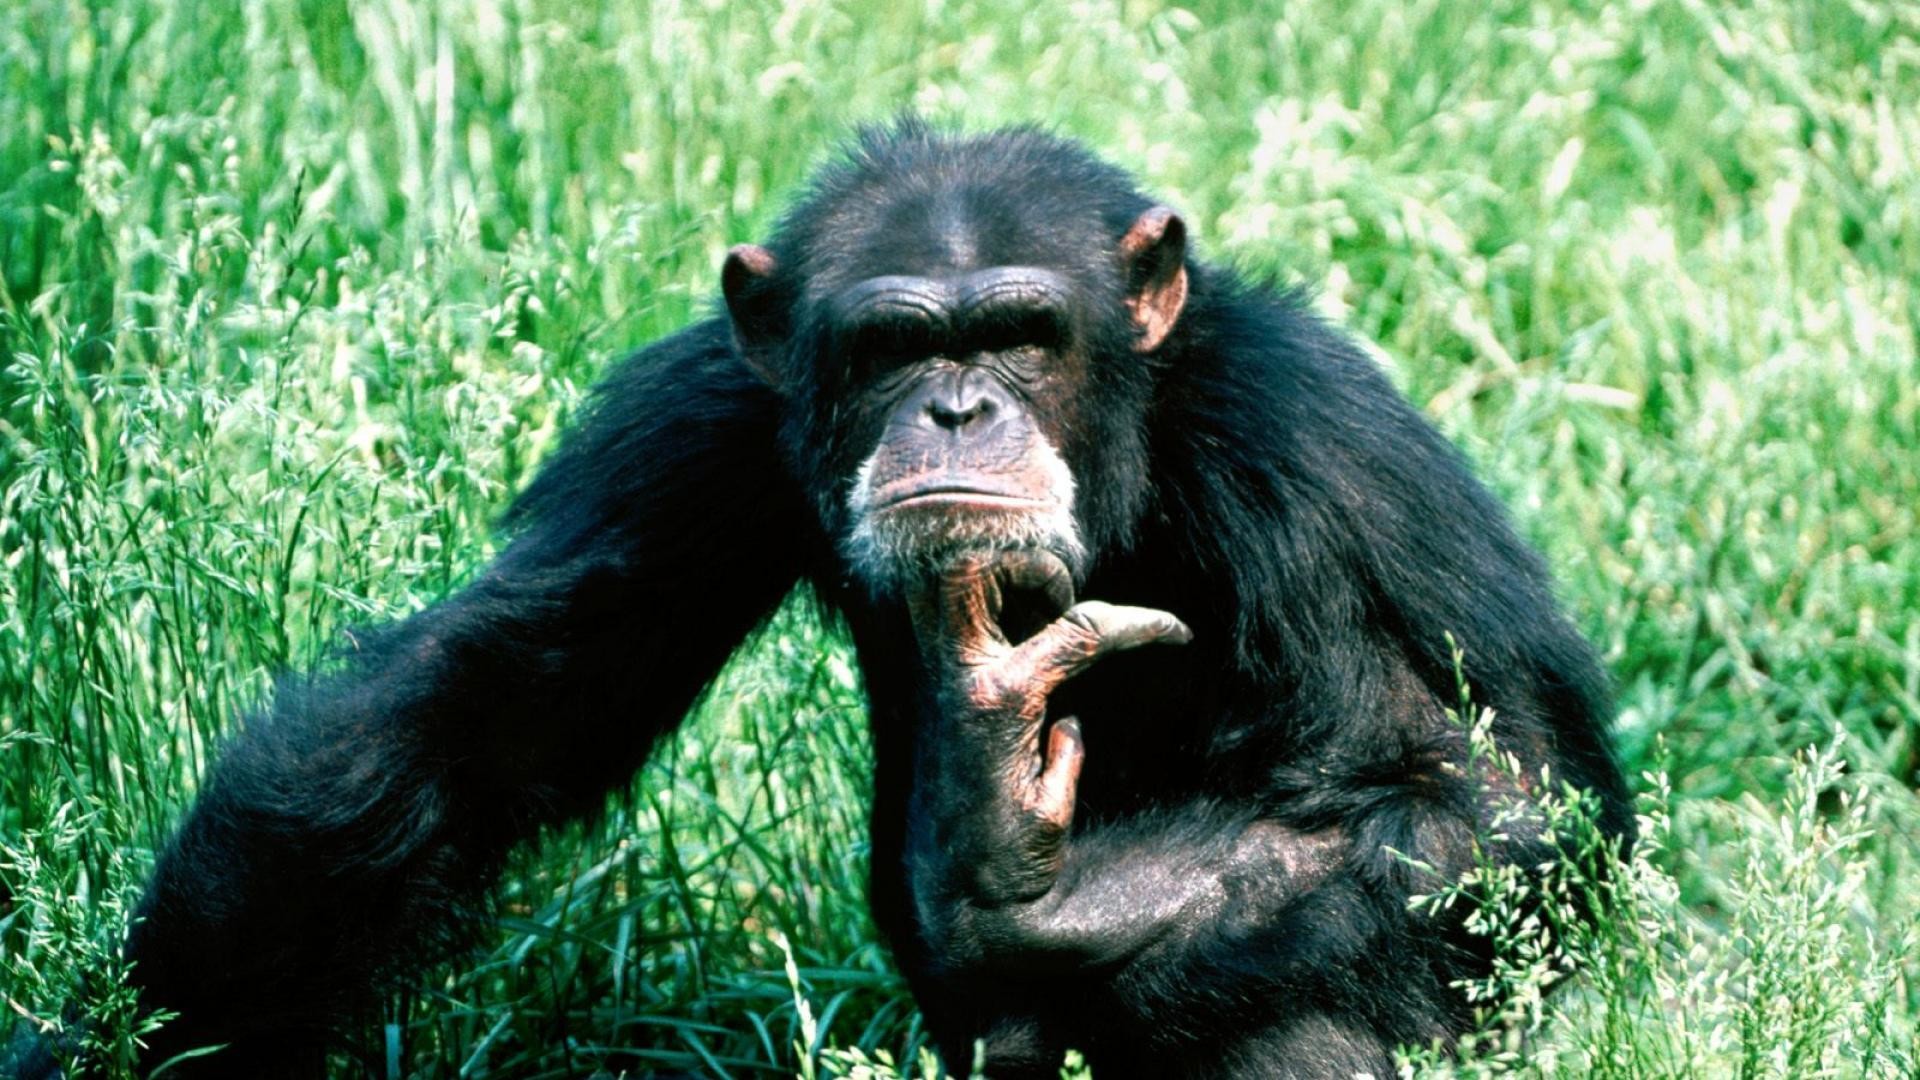 1920x1080 Lost In Thought Chimpanzee HD wallpaper - Animal Backgrounds